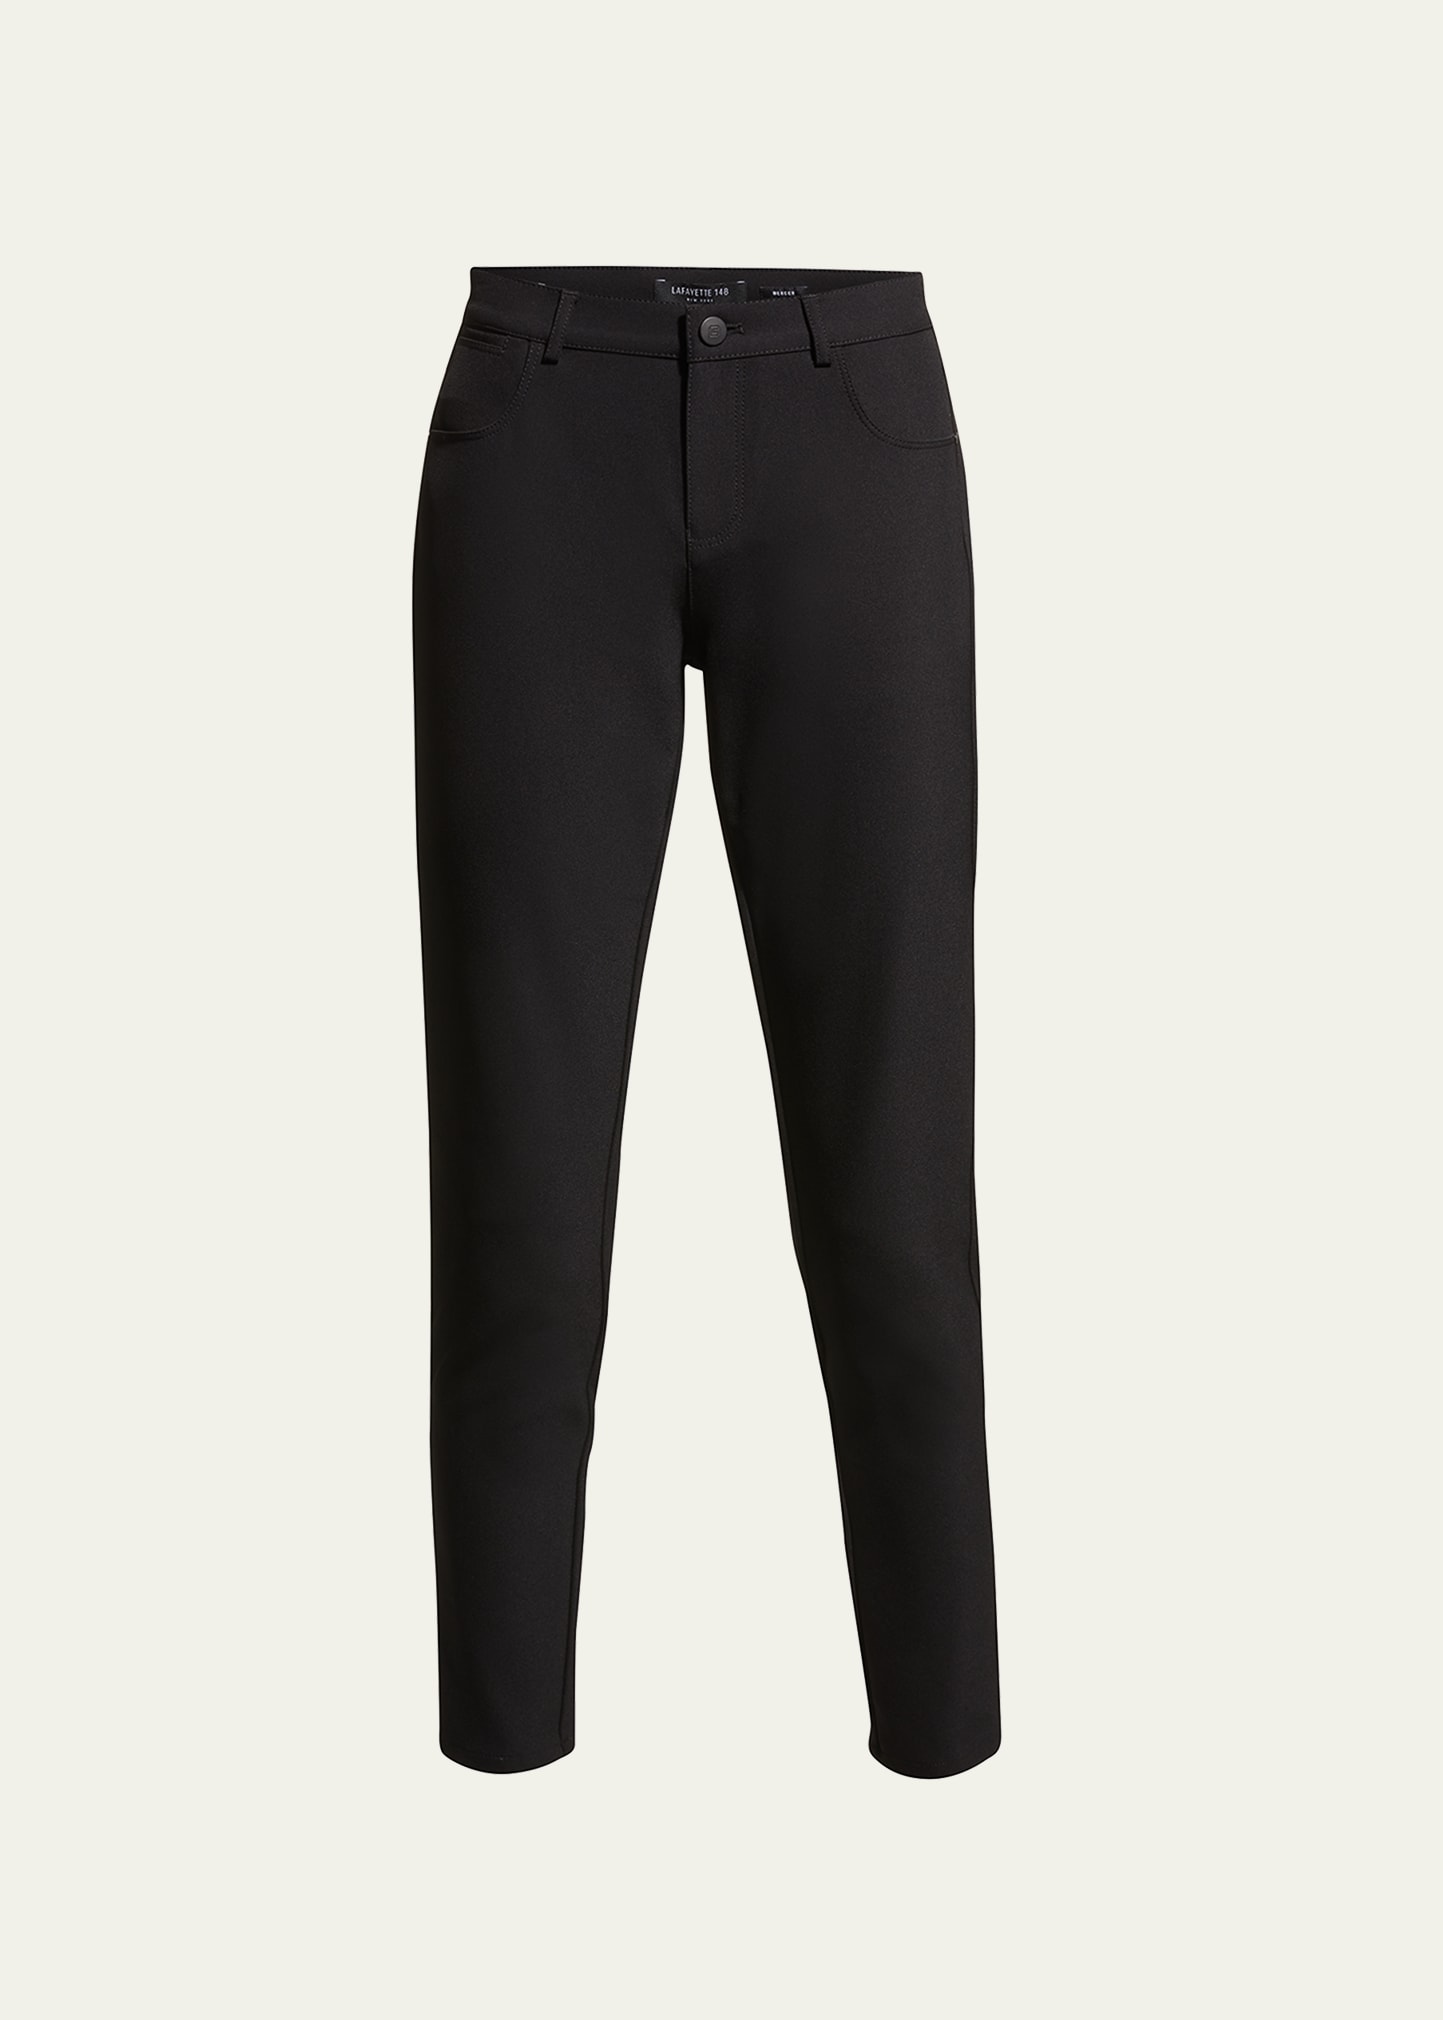 Mercer Acclaimed Stretch Mid-Rise Skinny Jeans